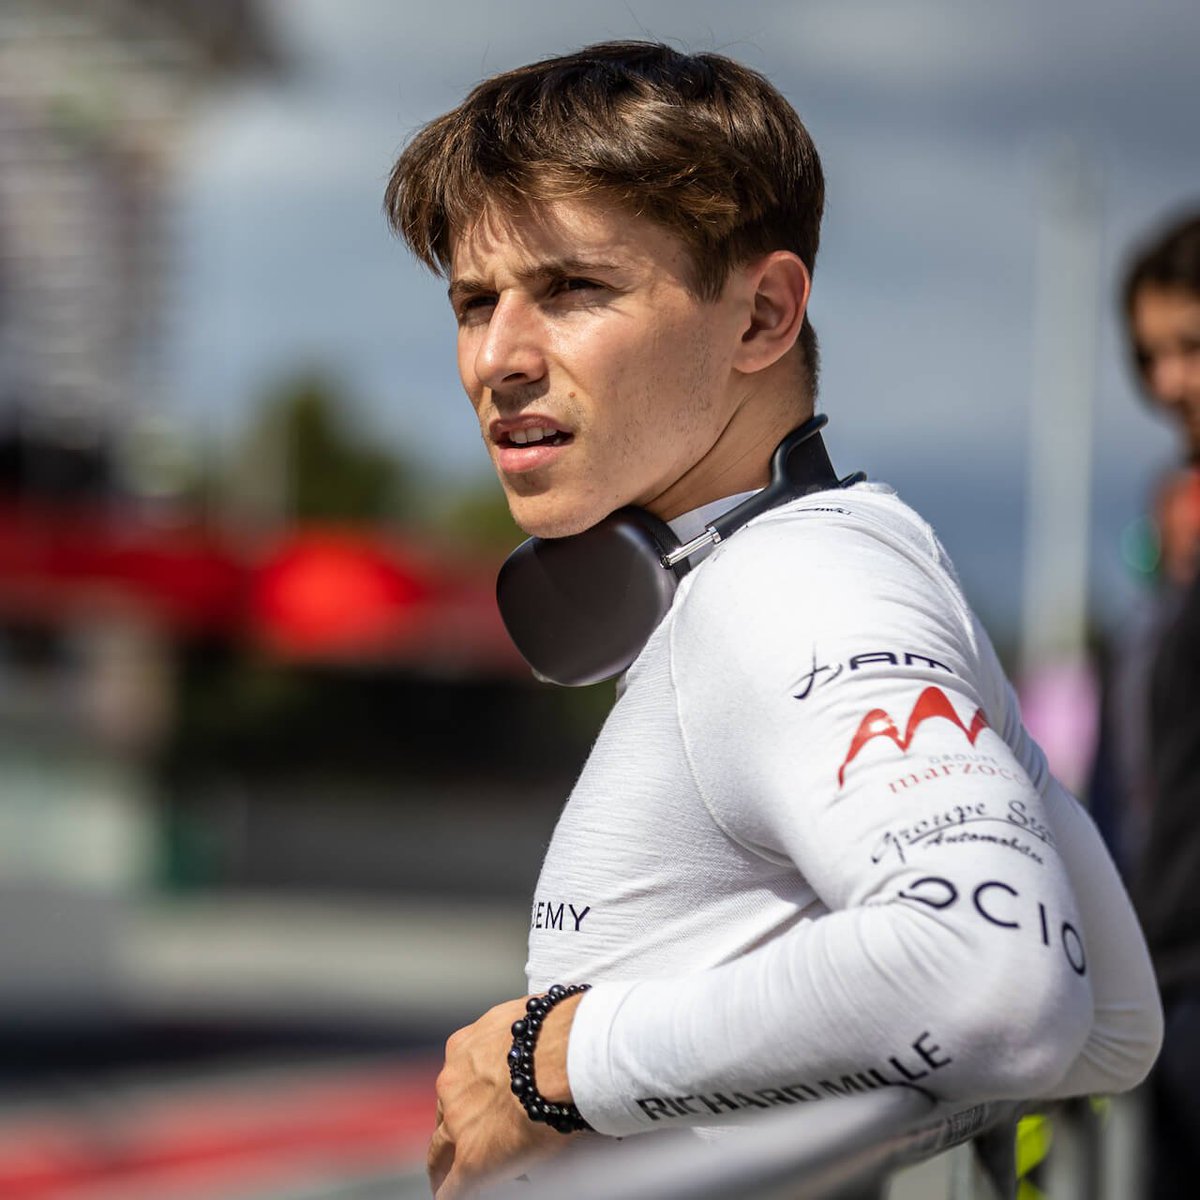 It's Race Day in Monaco, and Arthur will be lining up 19th on the grid for the Sprint Race ❤️

Praying for a better day ahead 🤞

📸: Dutch Photo Agency / DAMS

#F2 #MonacoGP #ArthurLeclerc